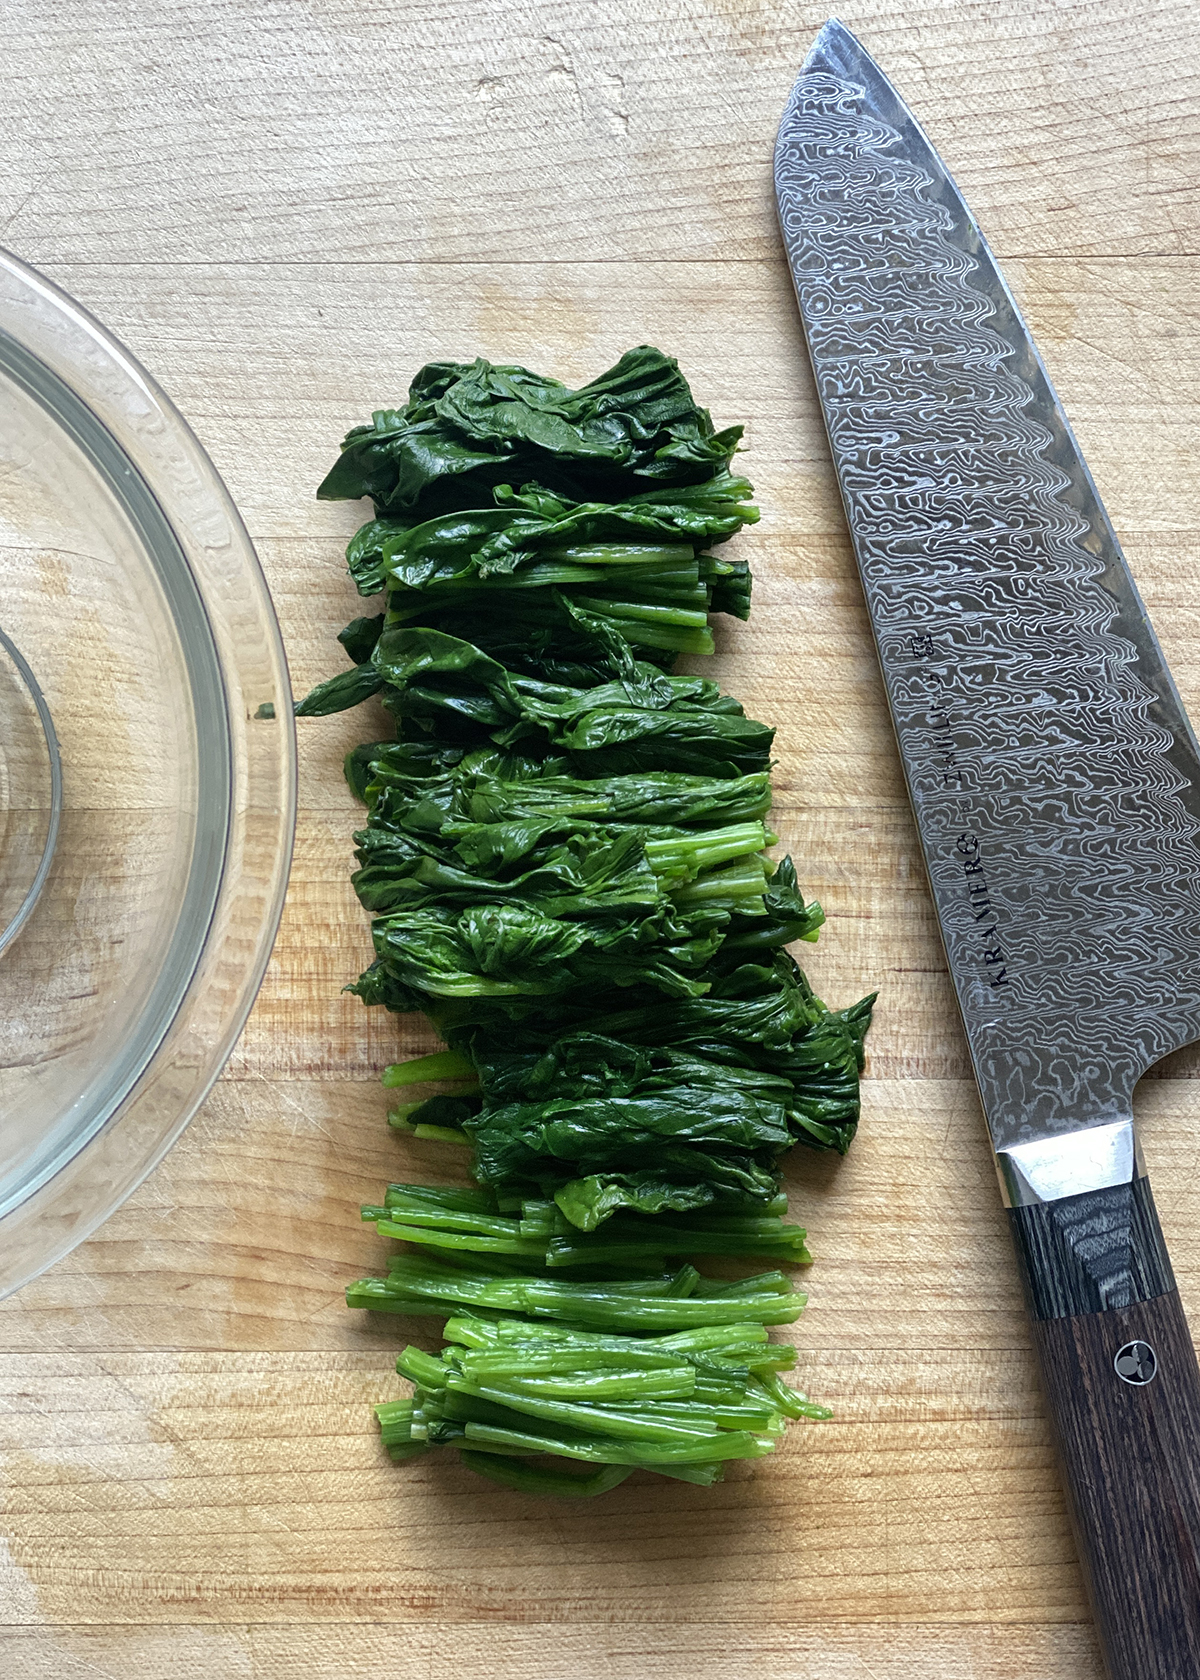 cooked spinach cut into 2-inch pieces lined up on wooden cutting board next to chef's knife